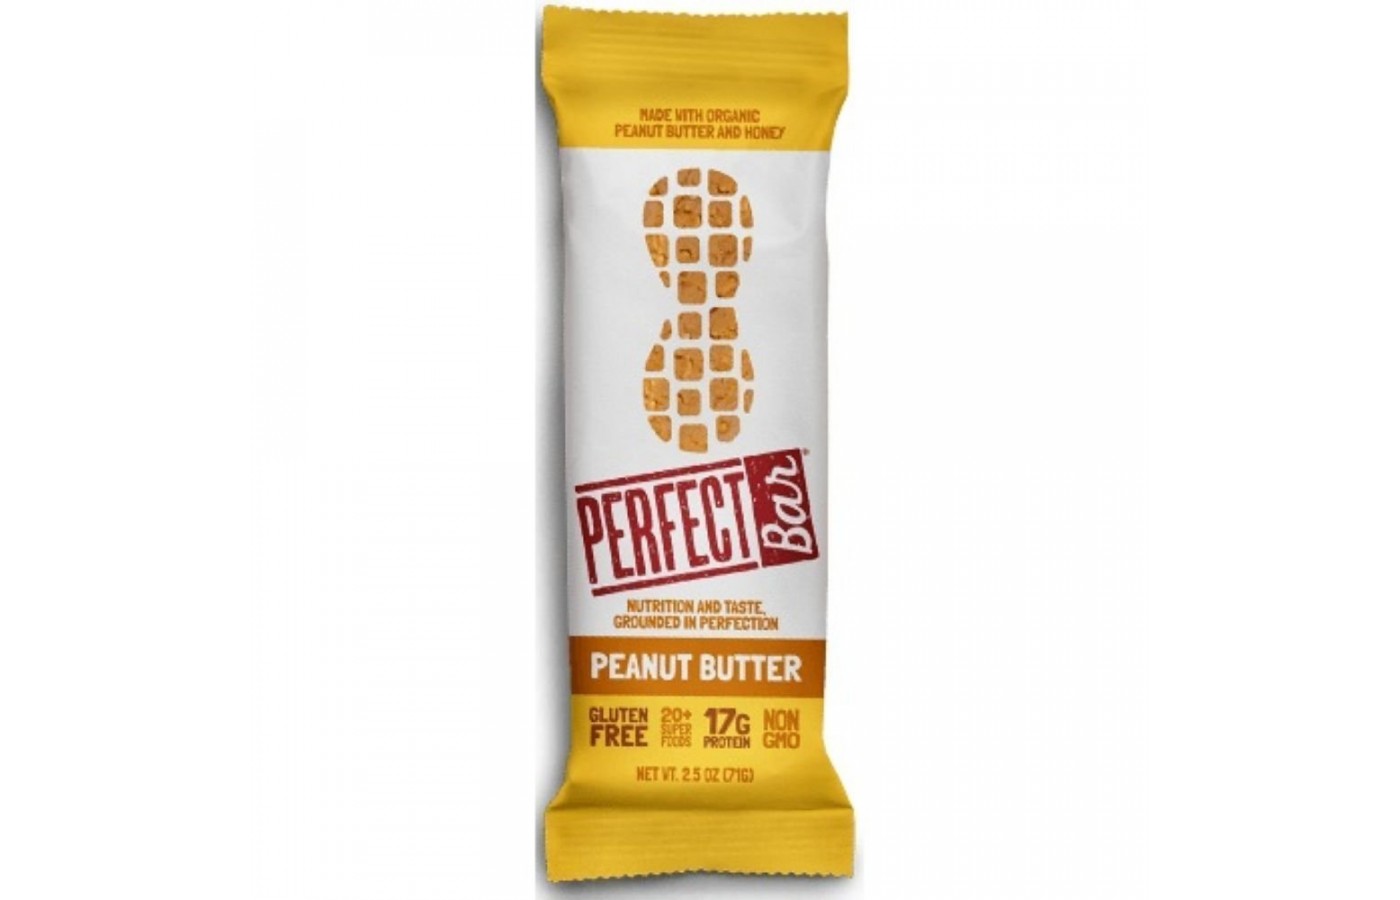 Perfect Bar Peanut Butter is their highest protein option, at 17 grams.